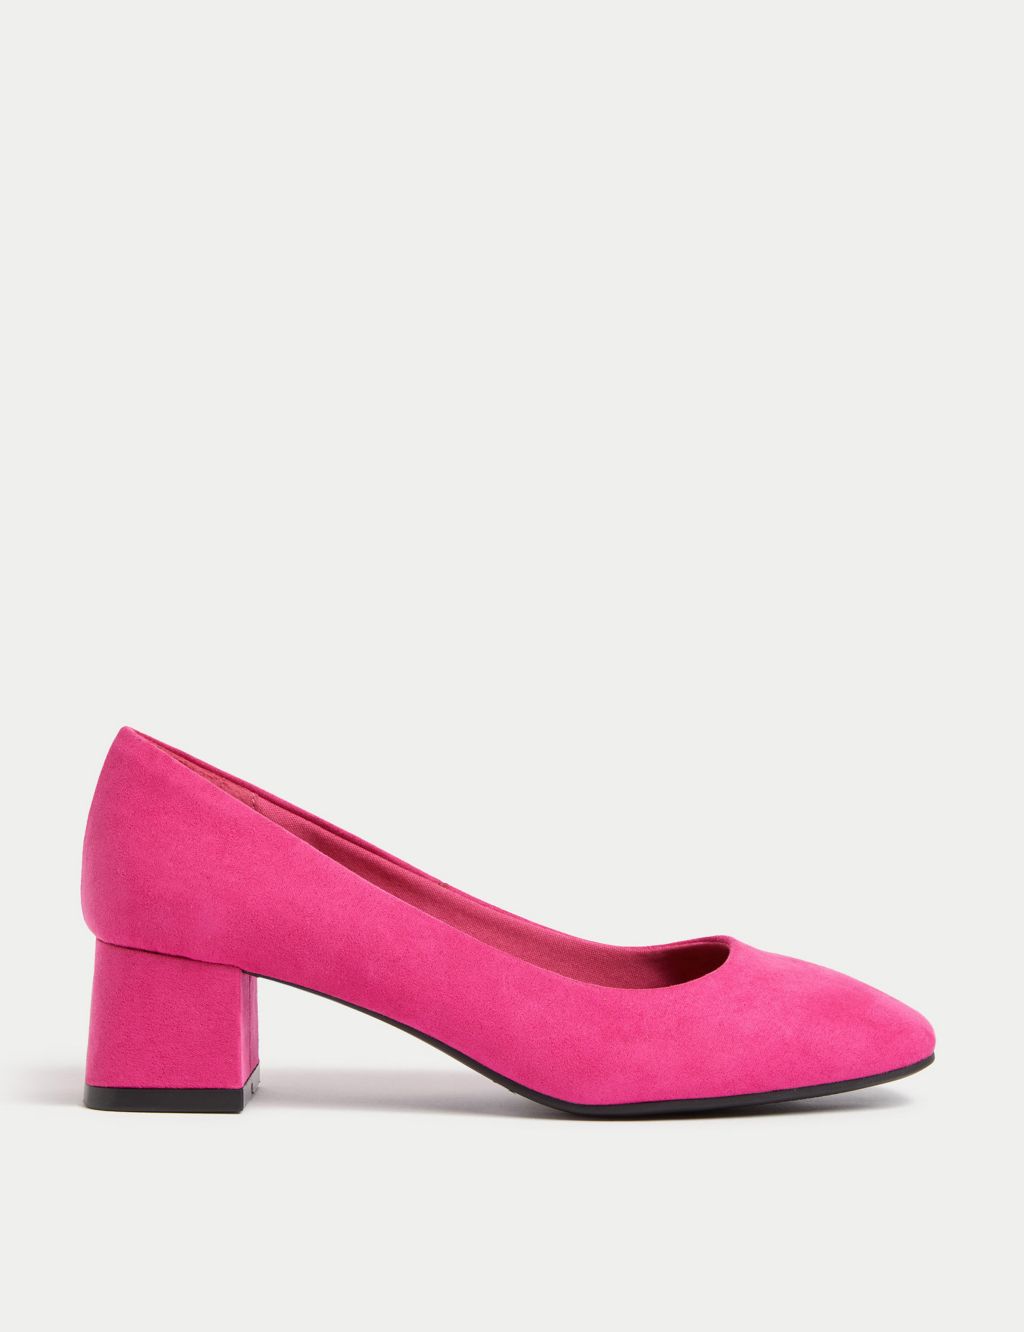 Wide Fit Block Heel Square Toe Shoes image 1